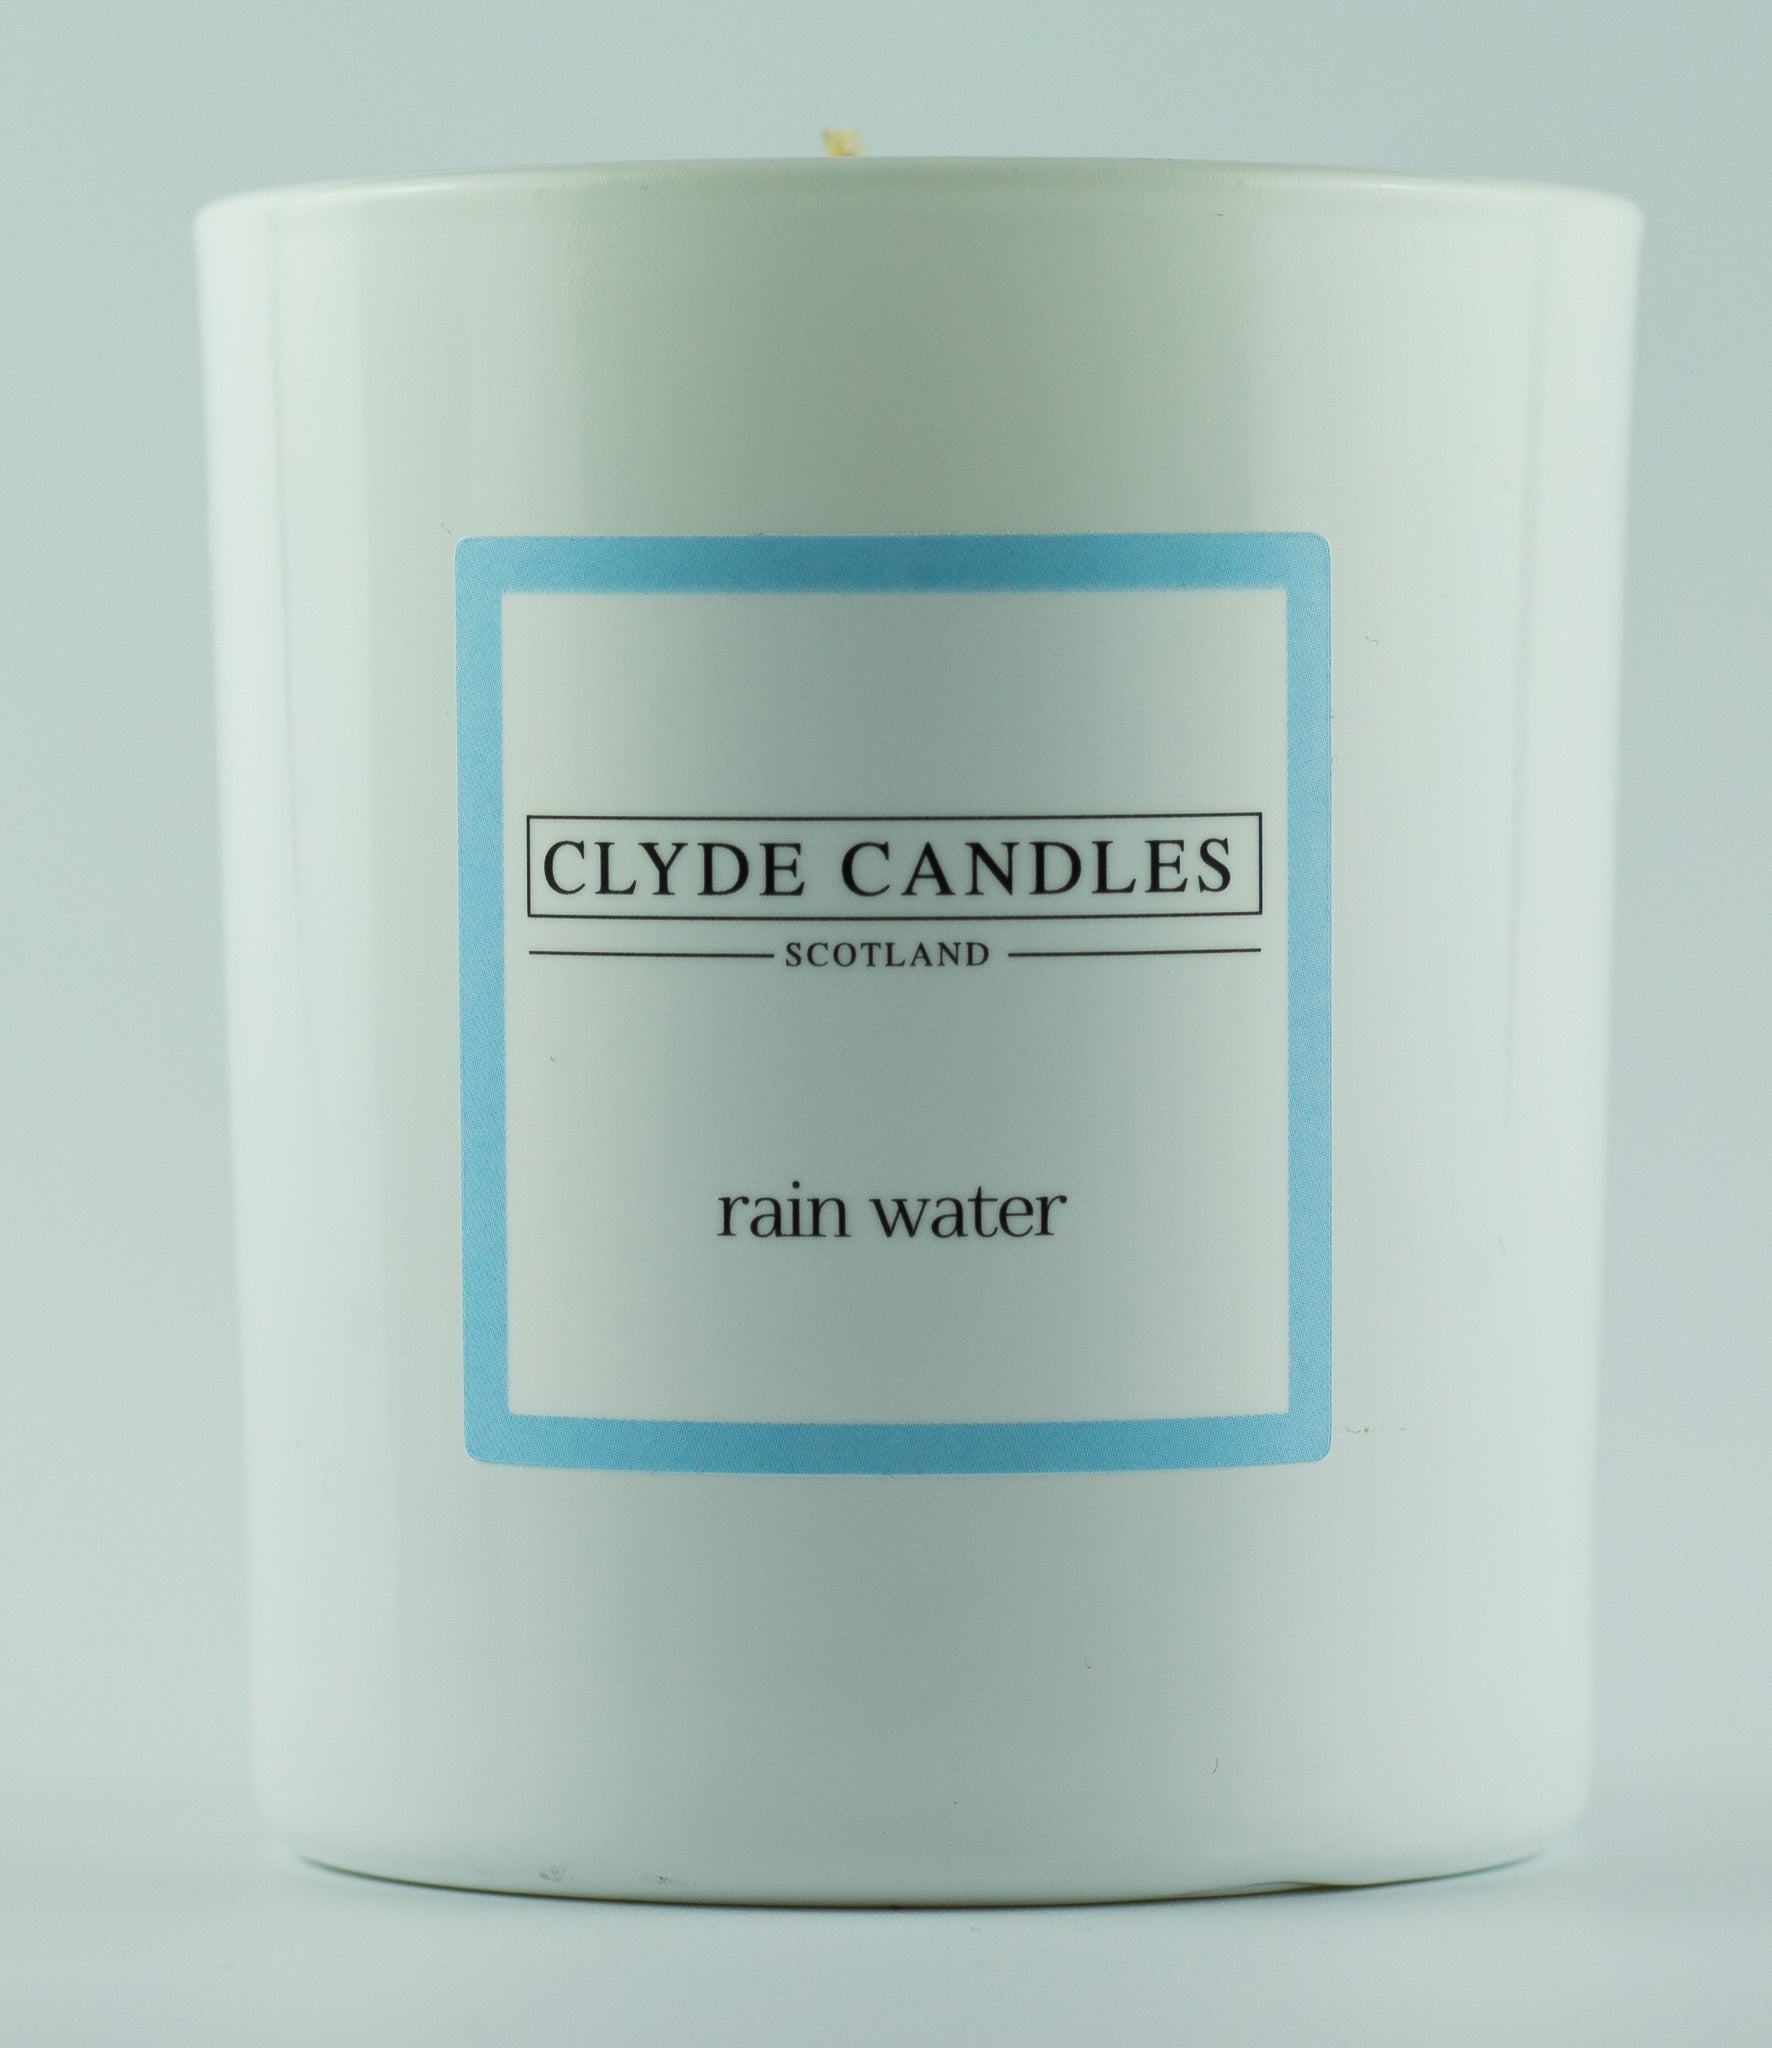 Rain Water Gift Box Candle - Large Glass, luxury natural soy candle gift for her